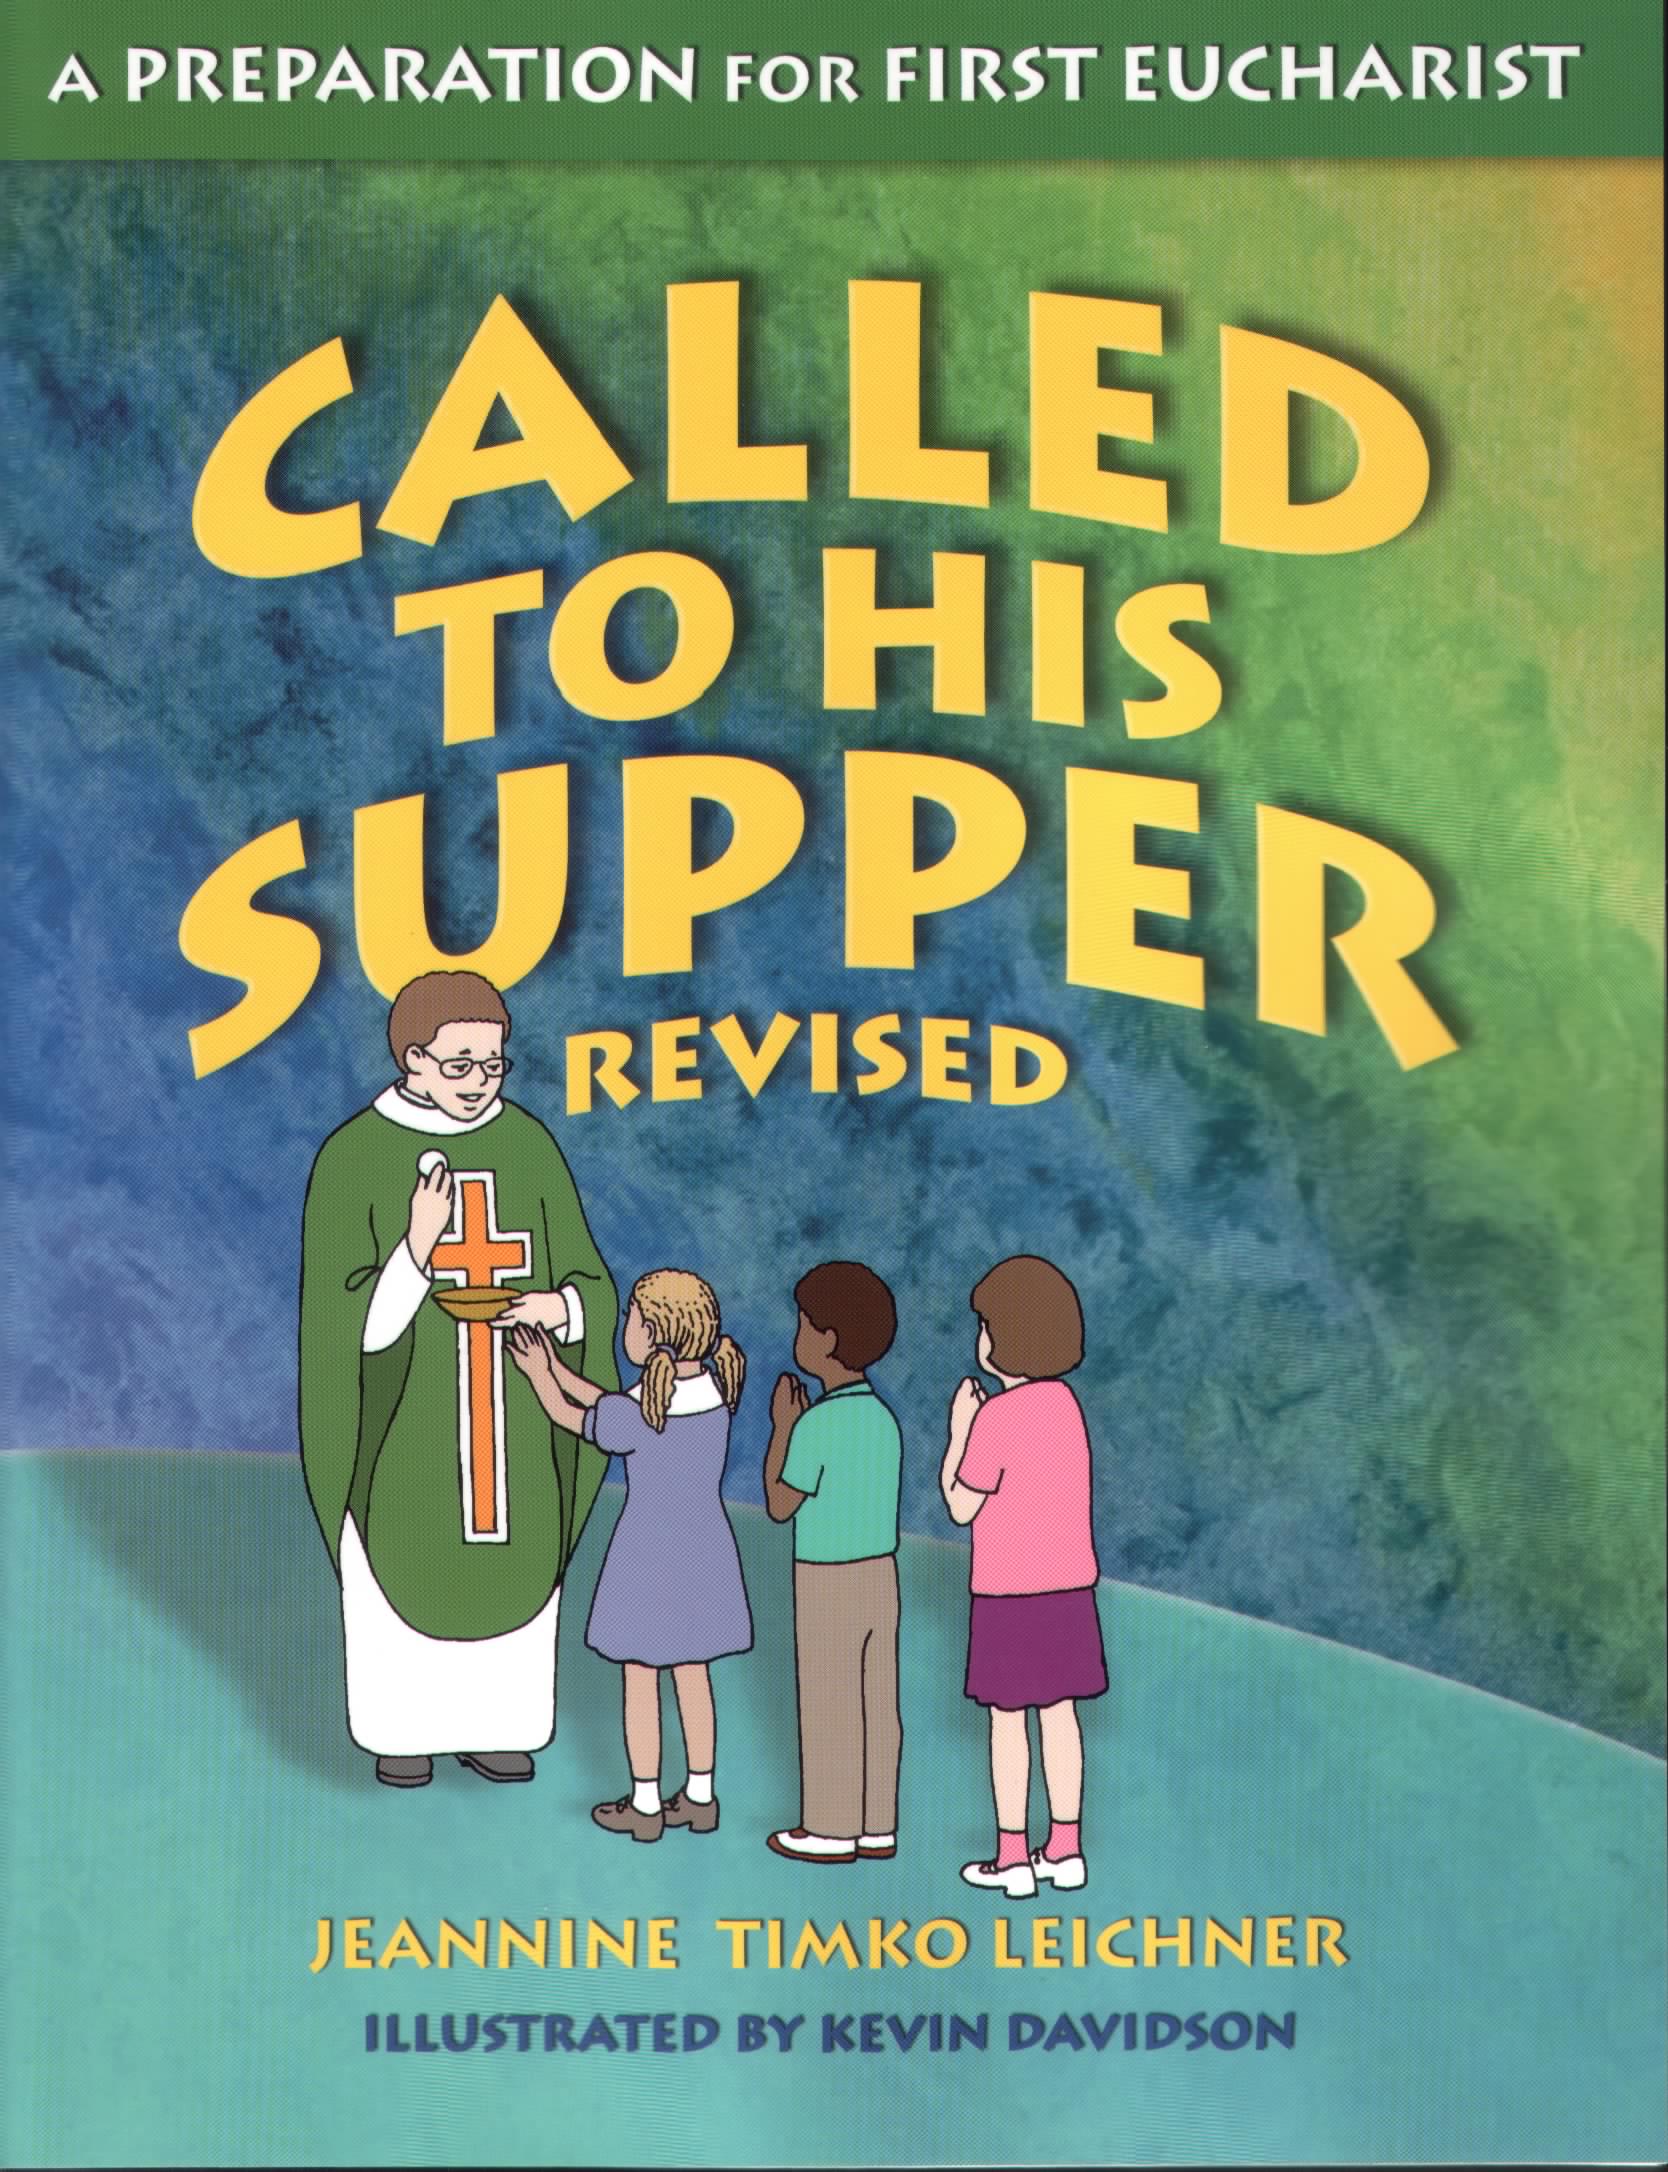 Called to His Supper: A Preparation for First Eurcharist / Jeannine Timko Leichner